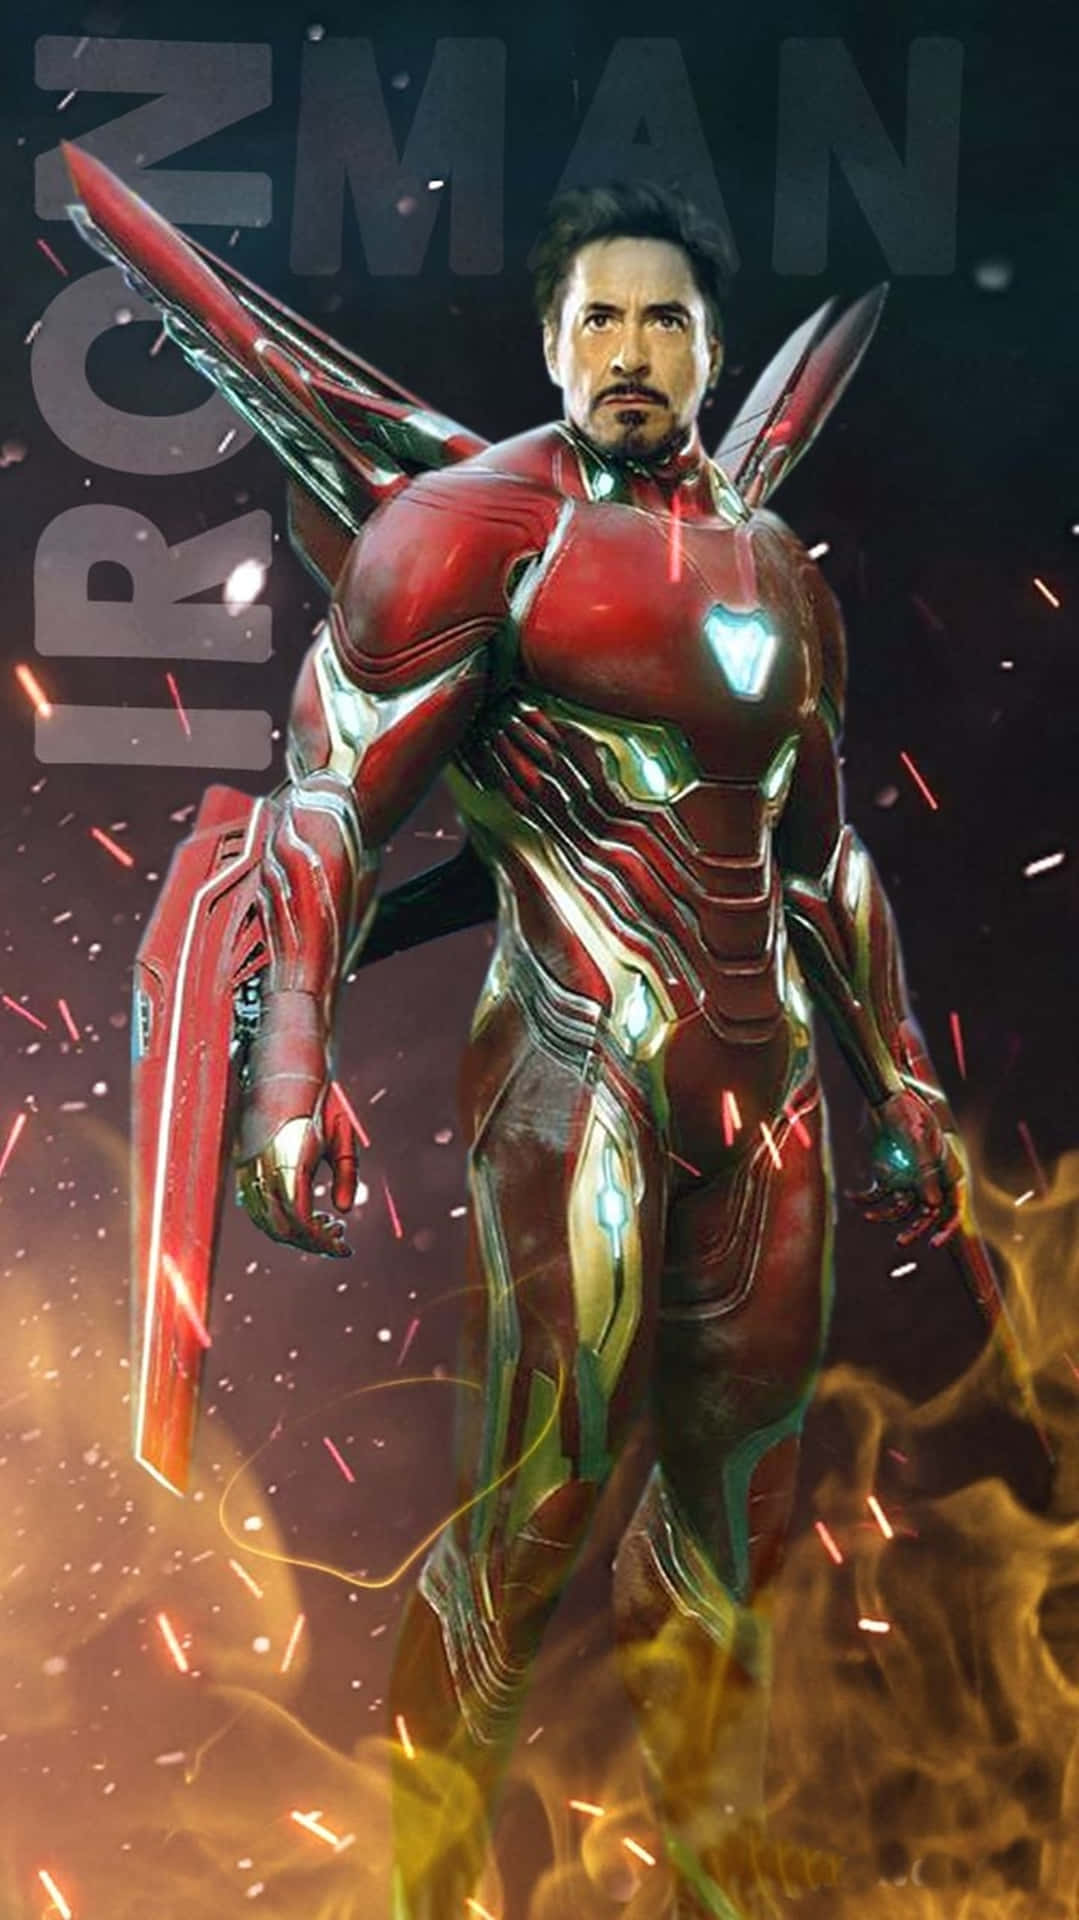 Download the Iconic Iron Man Superhero wallpaper straight to your Mobile! Wallpaper